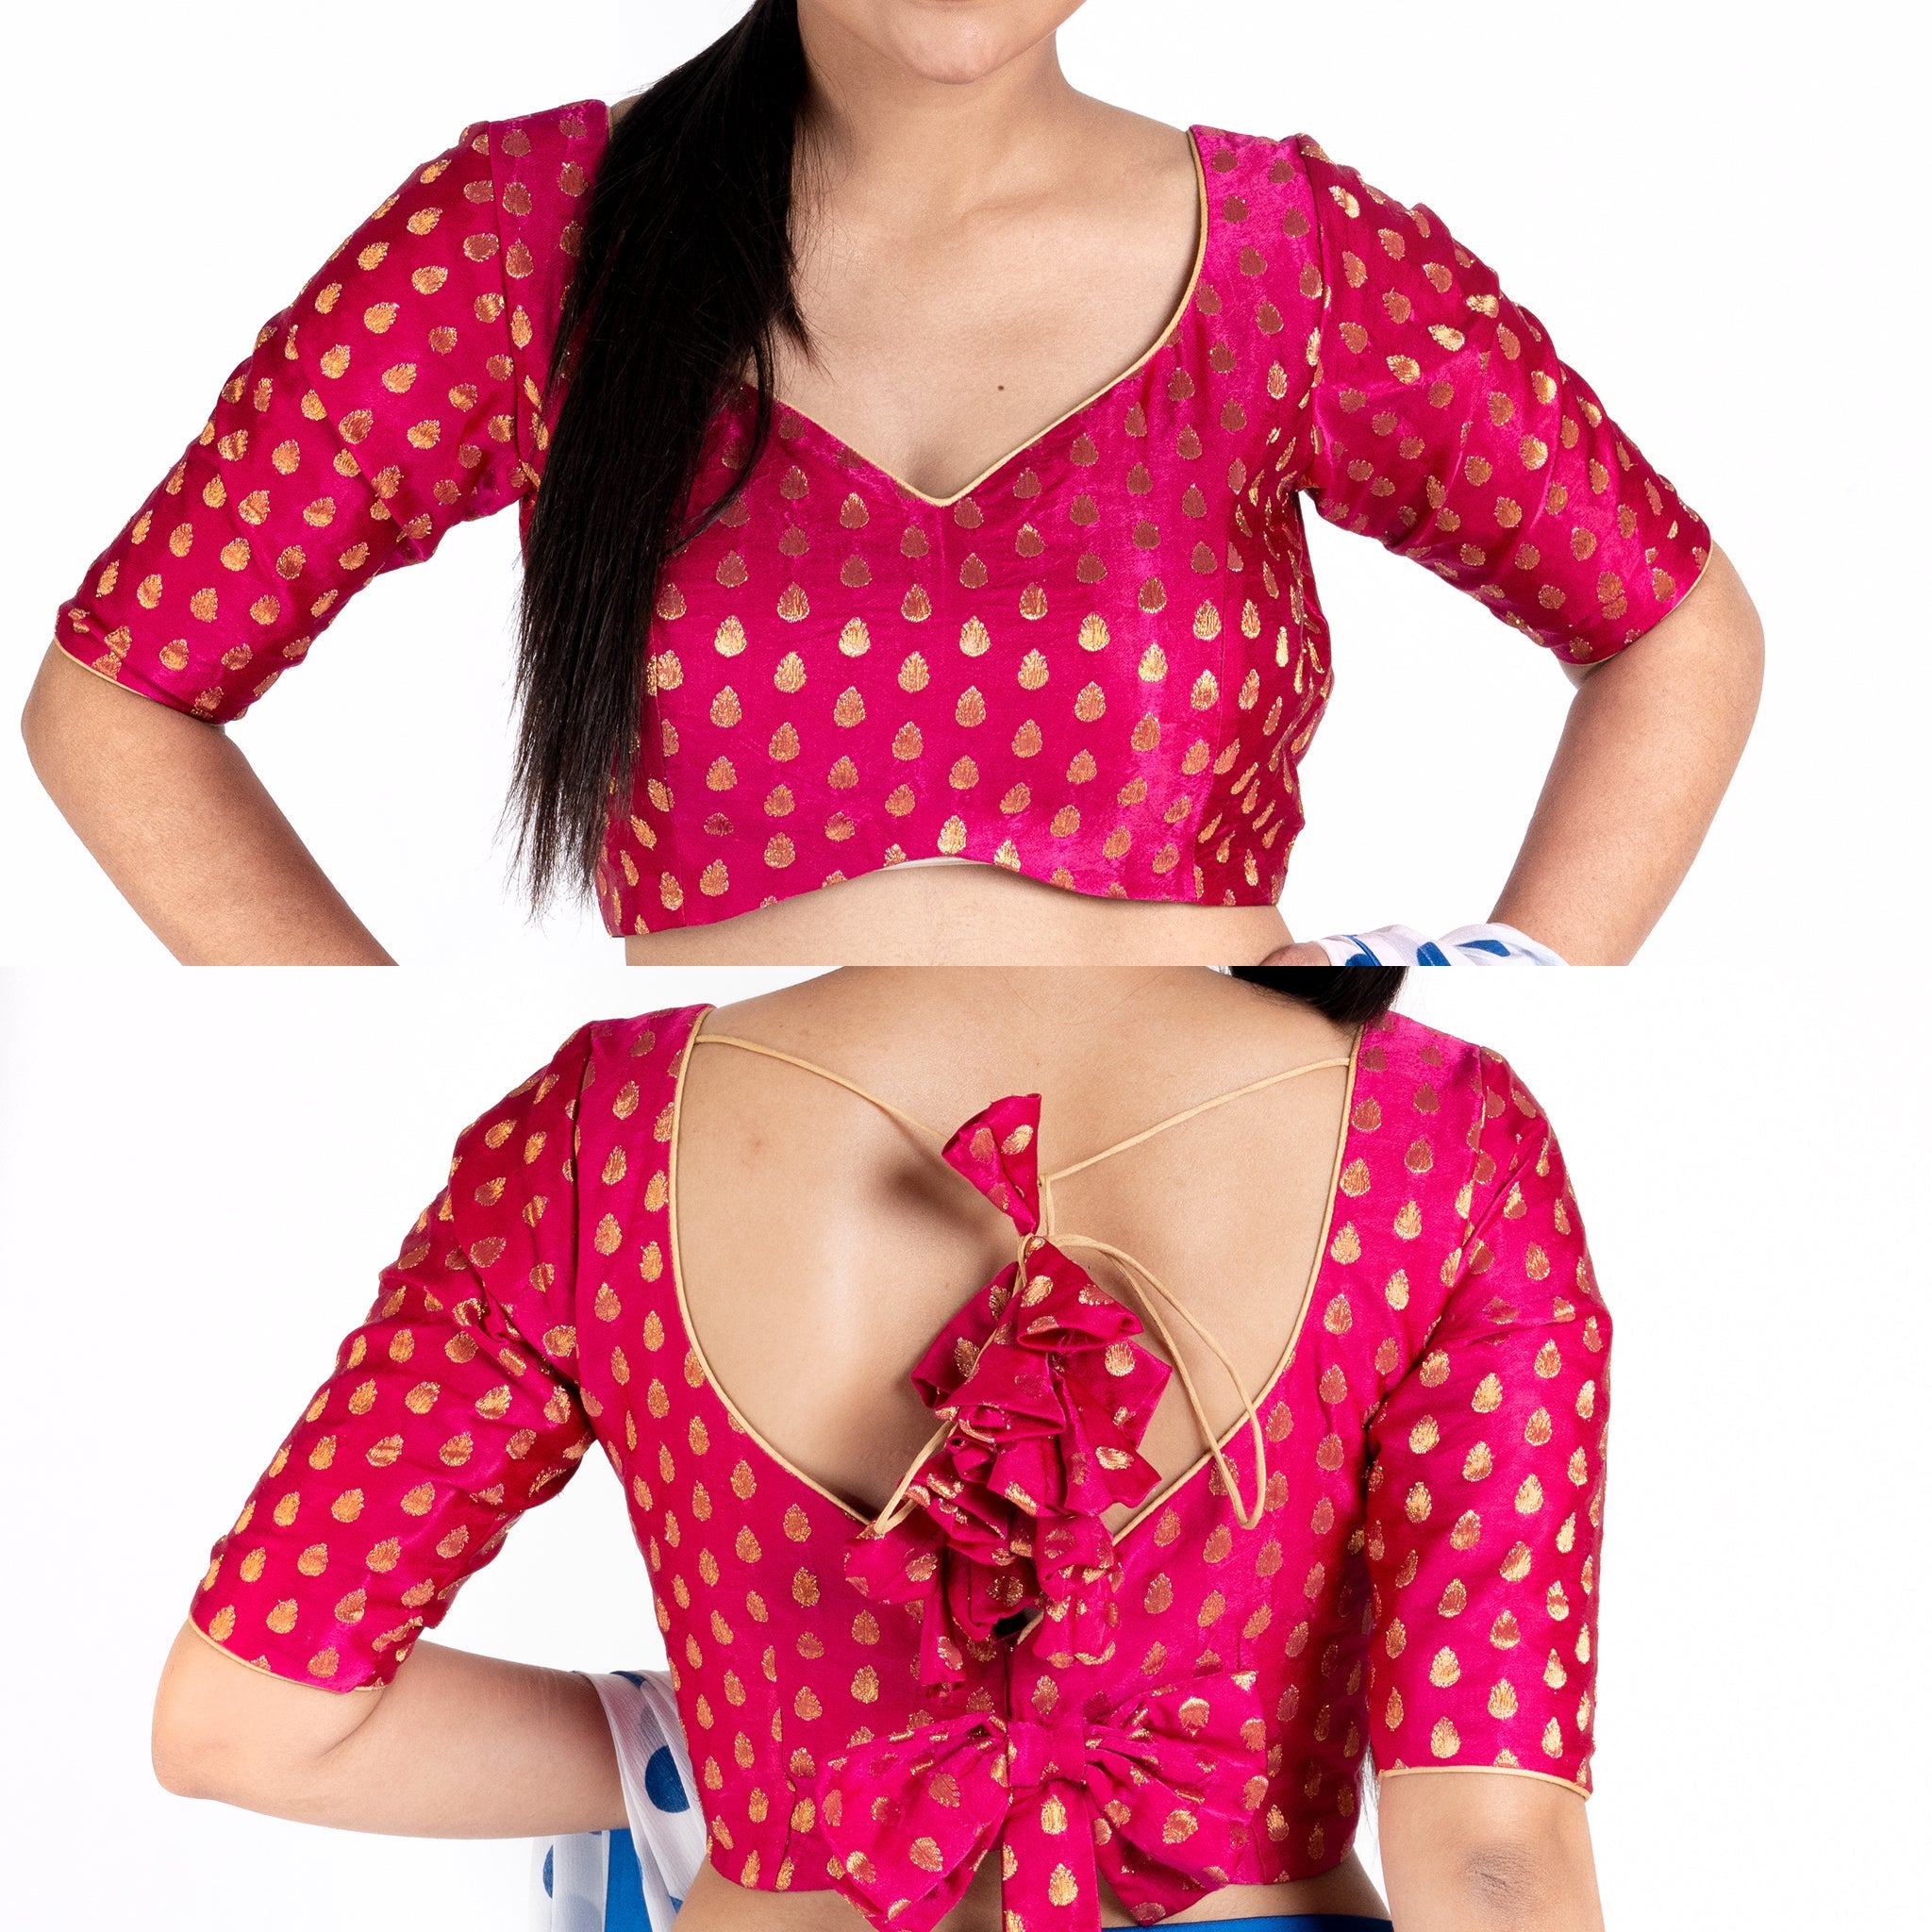 Women's Pink Brocade Padded Blouse With Back Design - Boveee